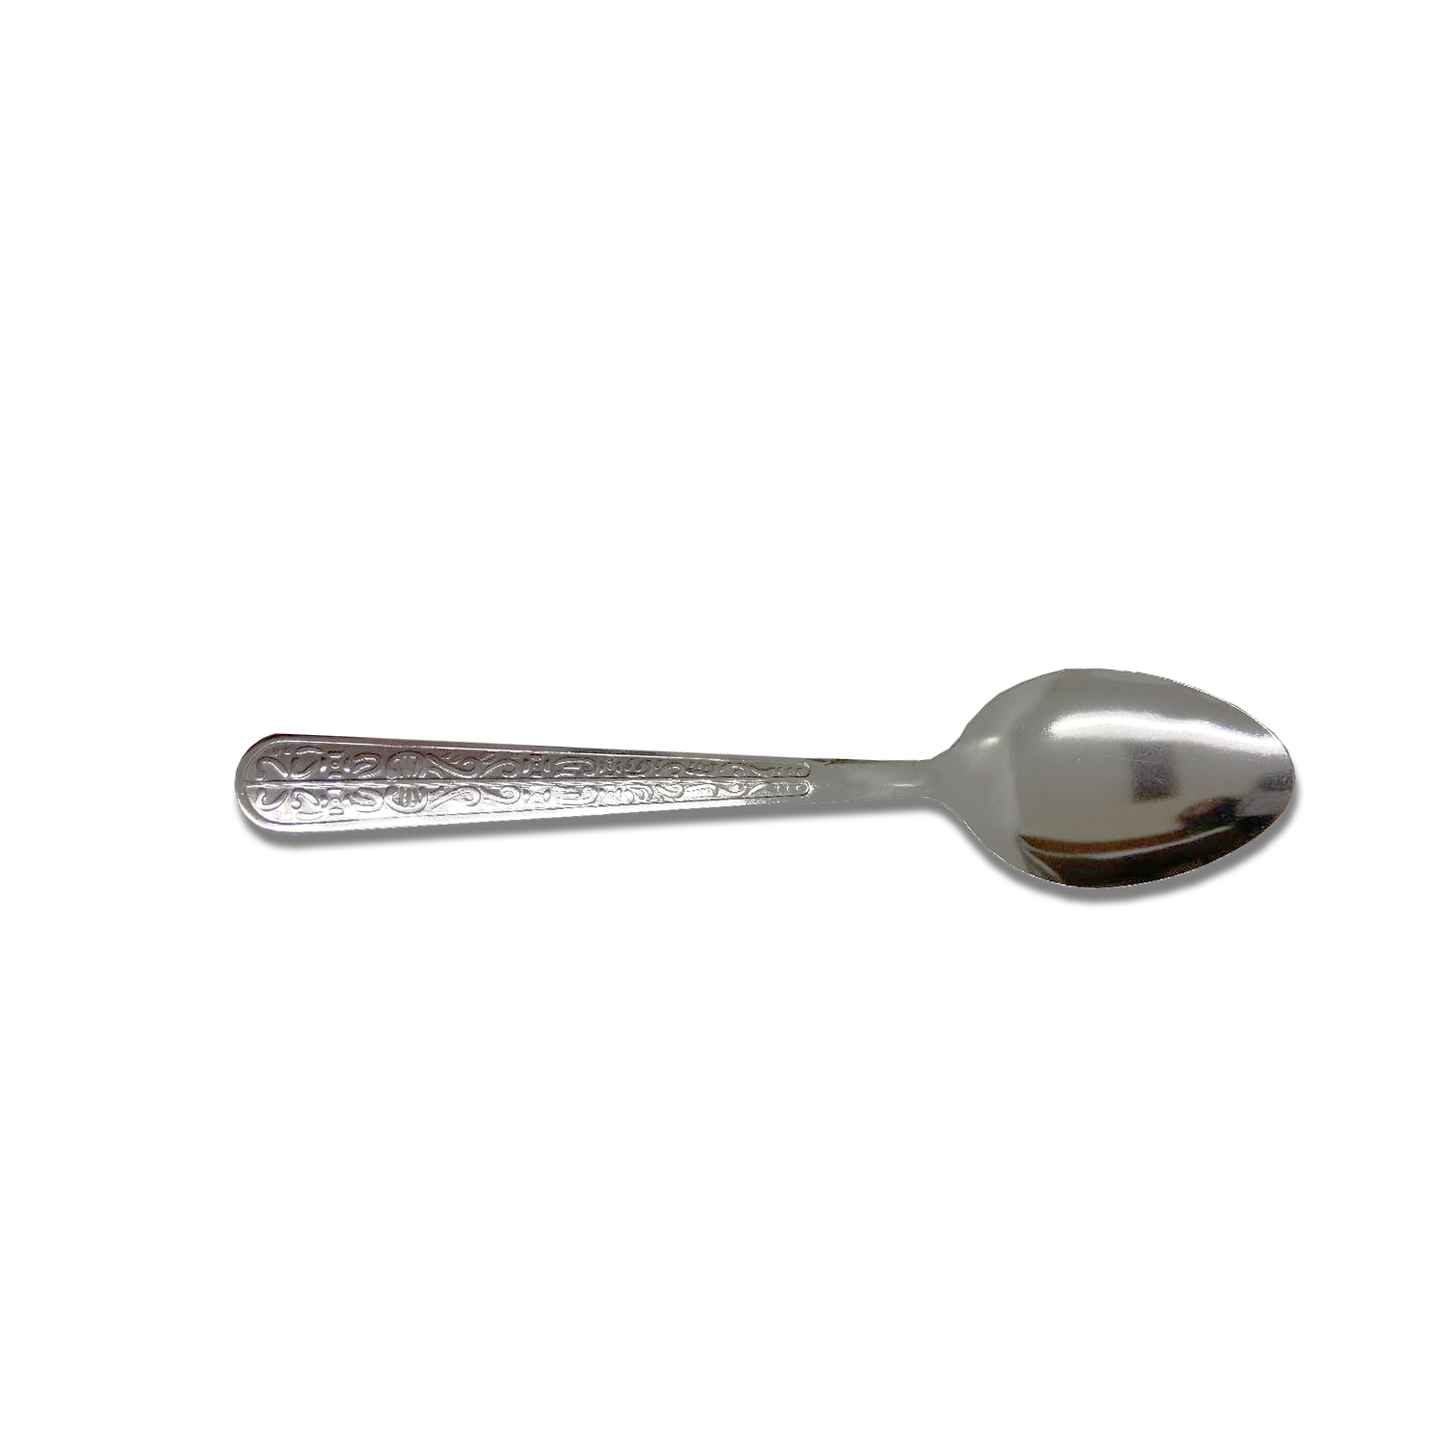 12 PC Classy Stainless Steel Dinner Spoon